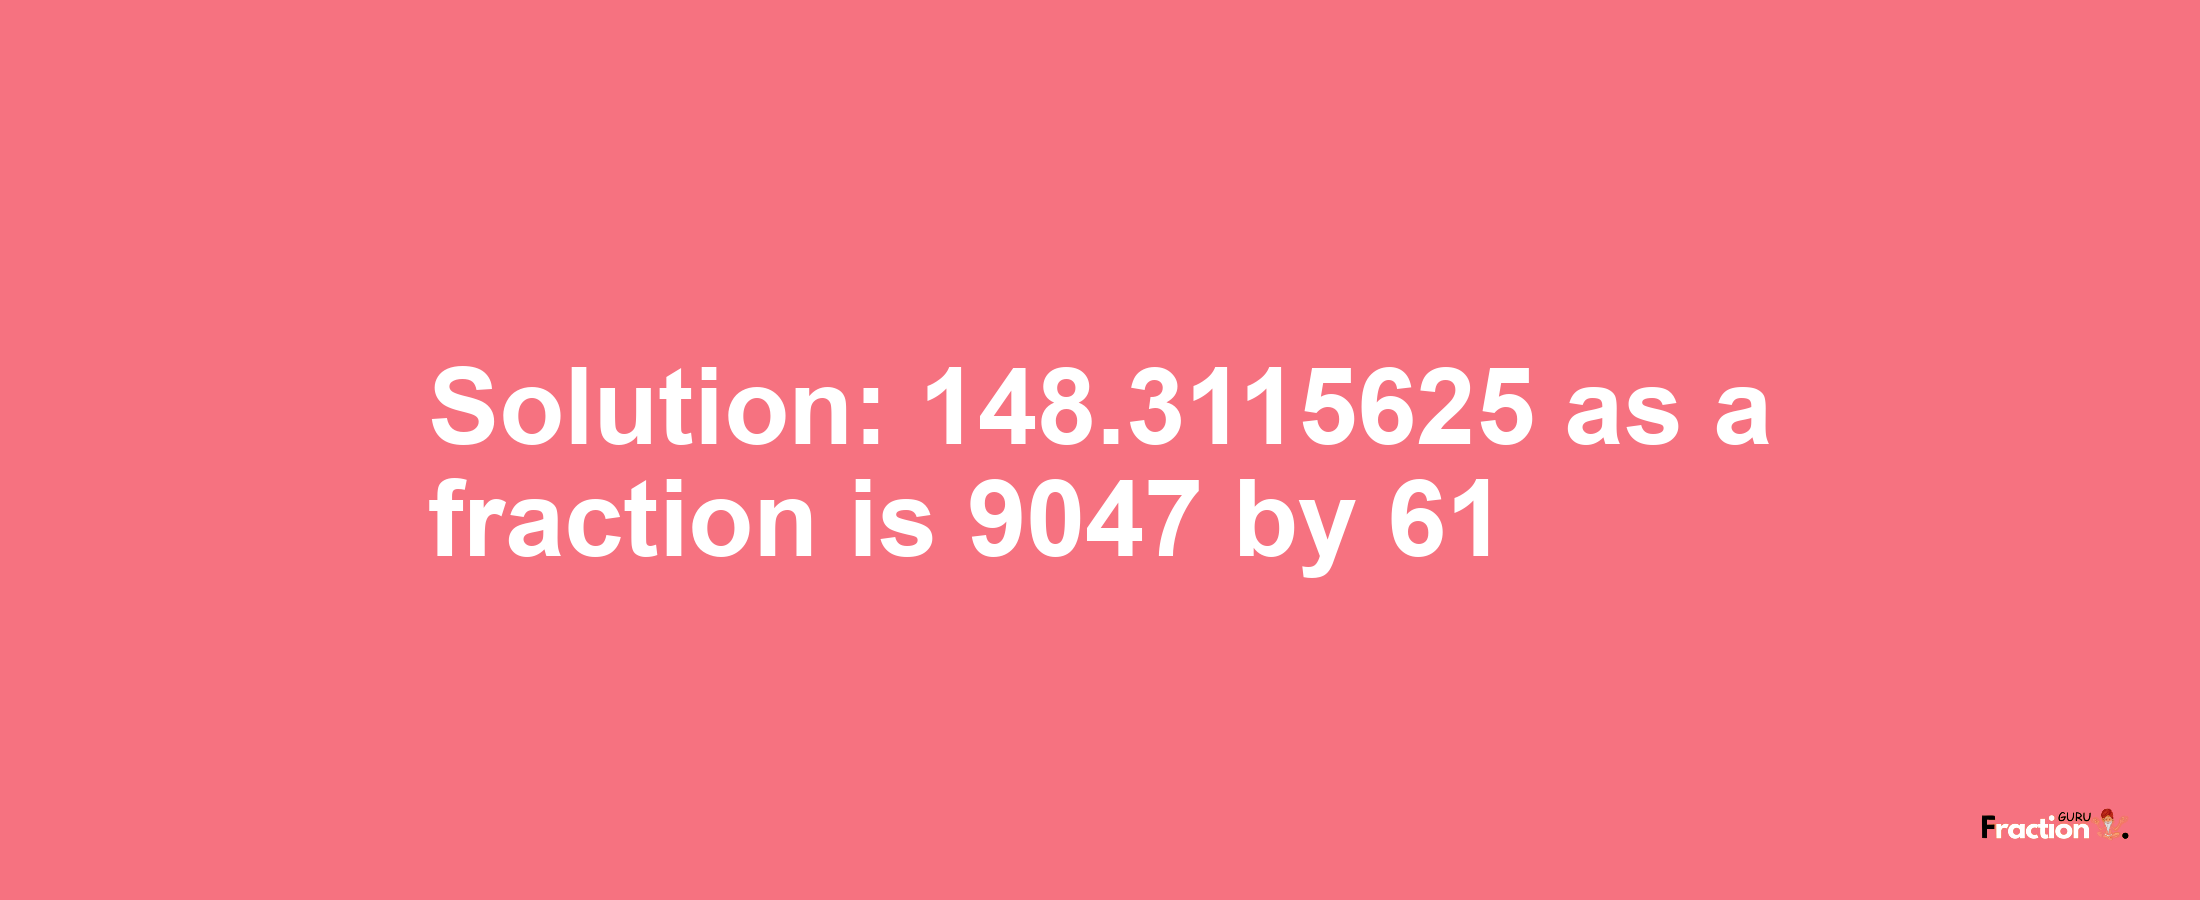 Solution:148.3115625 as a fraction is 9047/61